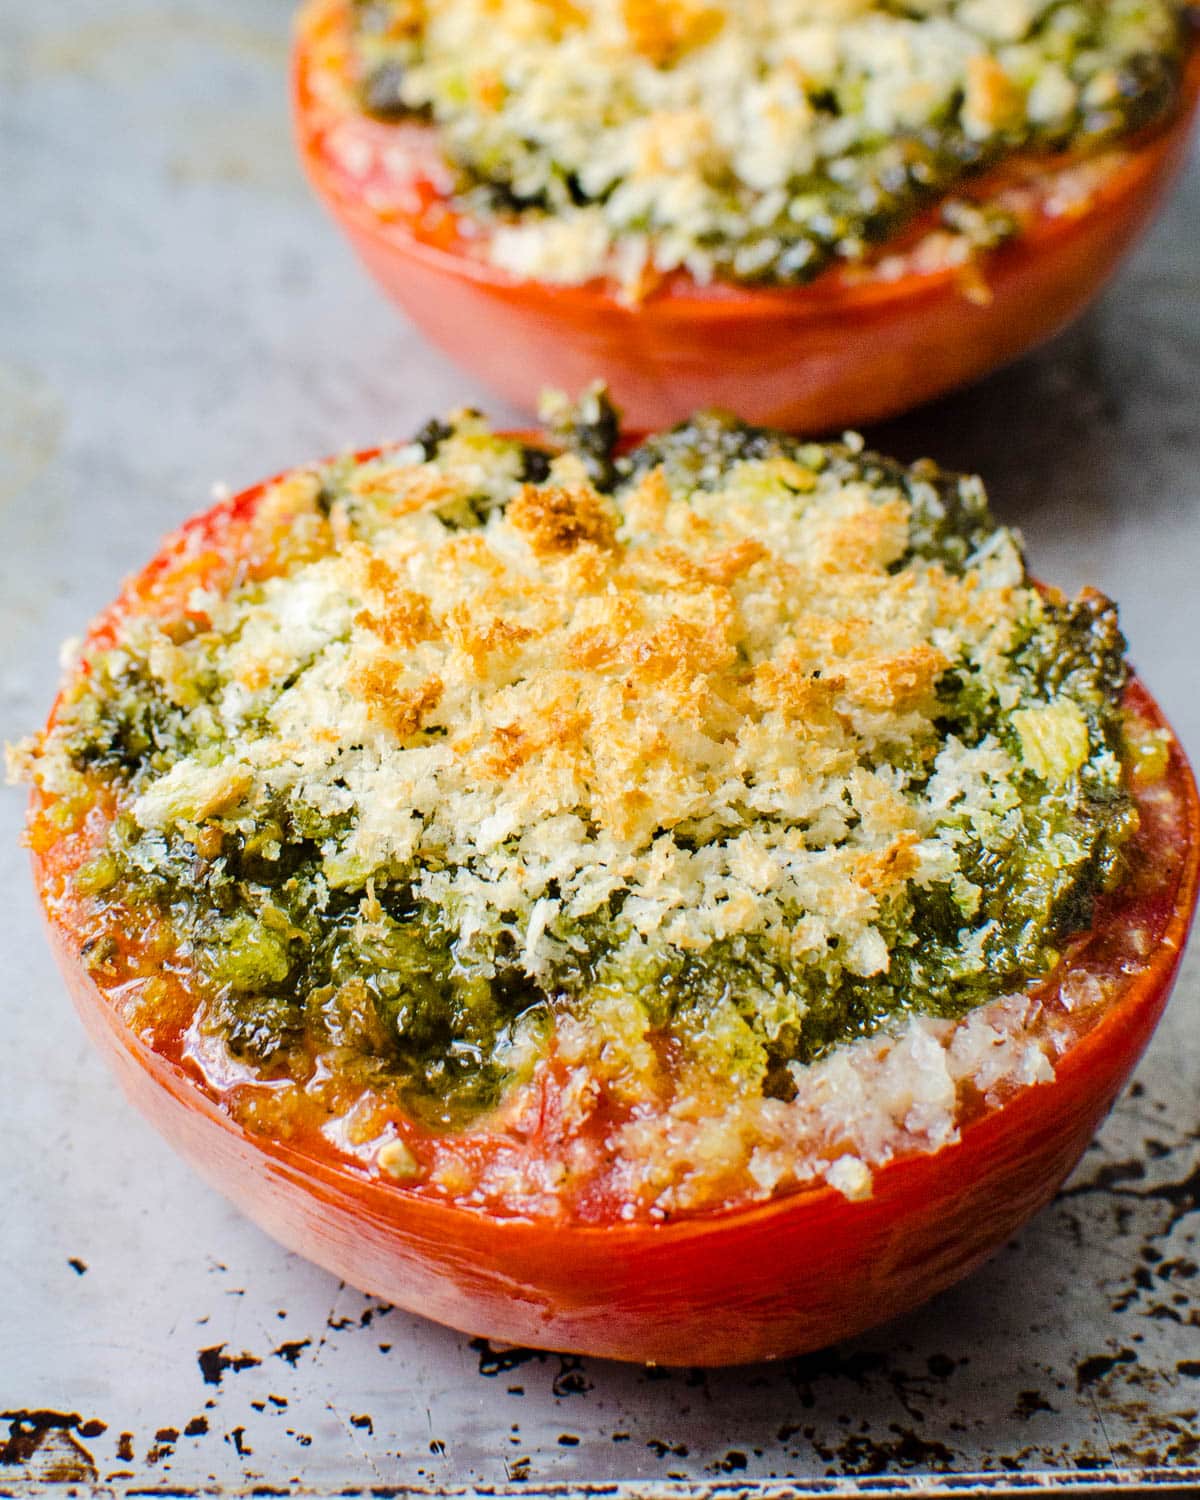 The pesto roasted tomatoes hot from the oven.